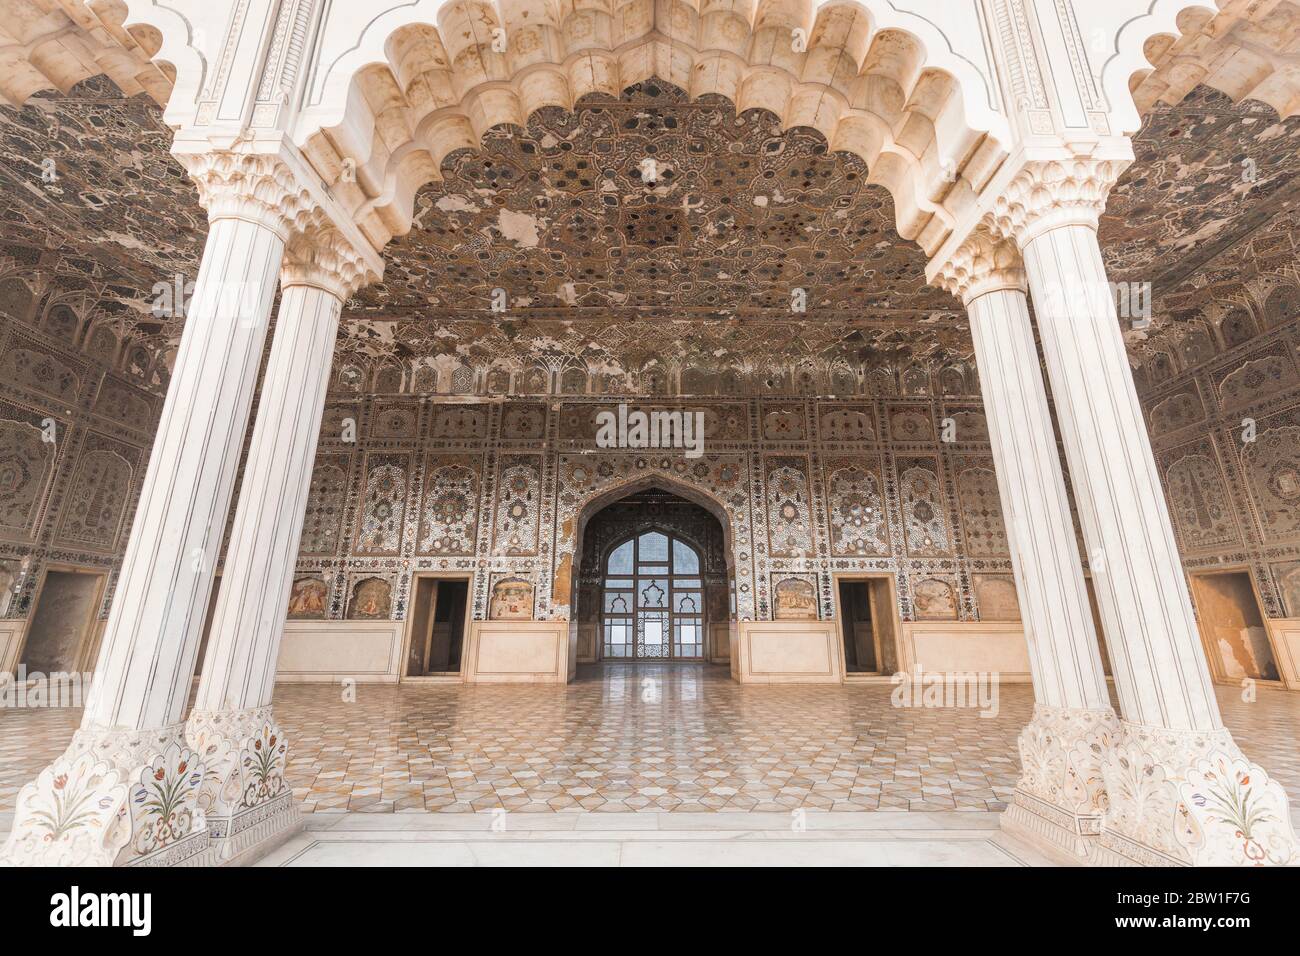 Palace area of Lahore Fort, Citadel of Mughal Empire, Islamic and Hindu architecture,  Lahore, Punjab Province, Pakistan, South Asia, Asia Stock Photo